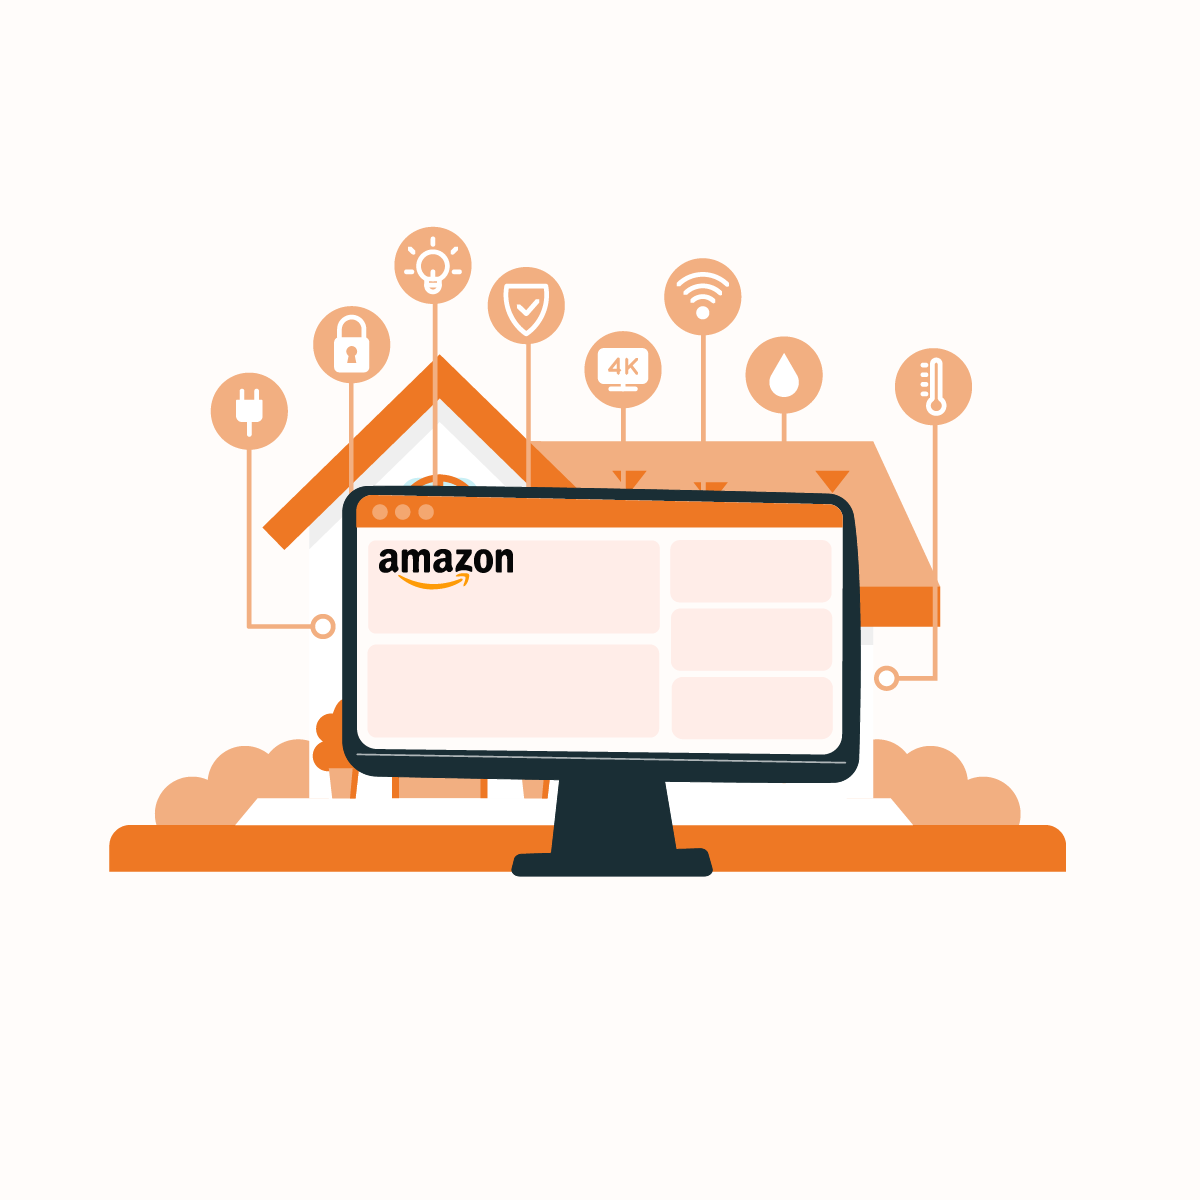 Scraping Amazon using Residential Proxies